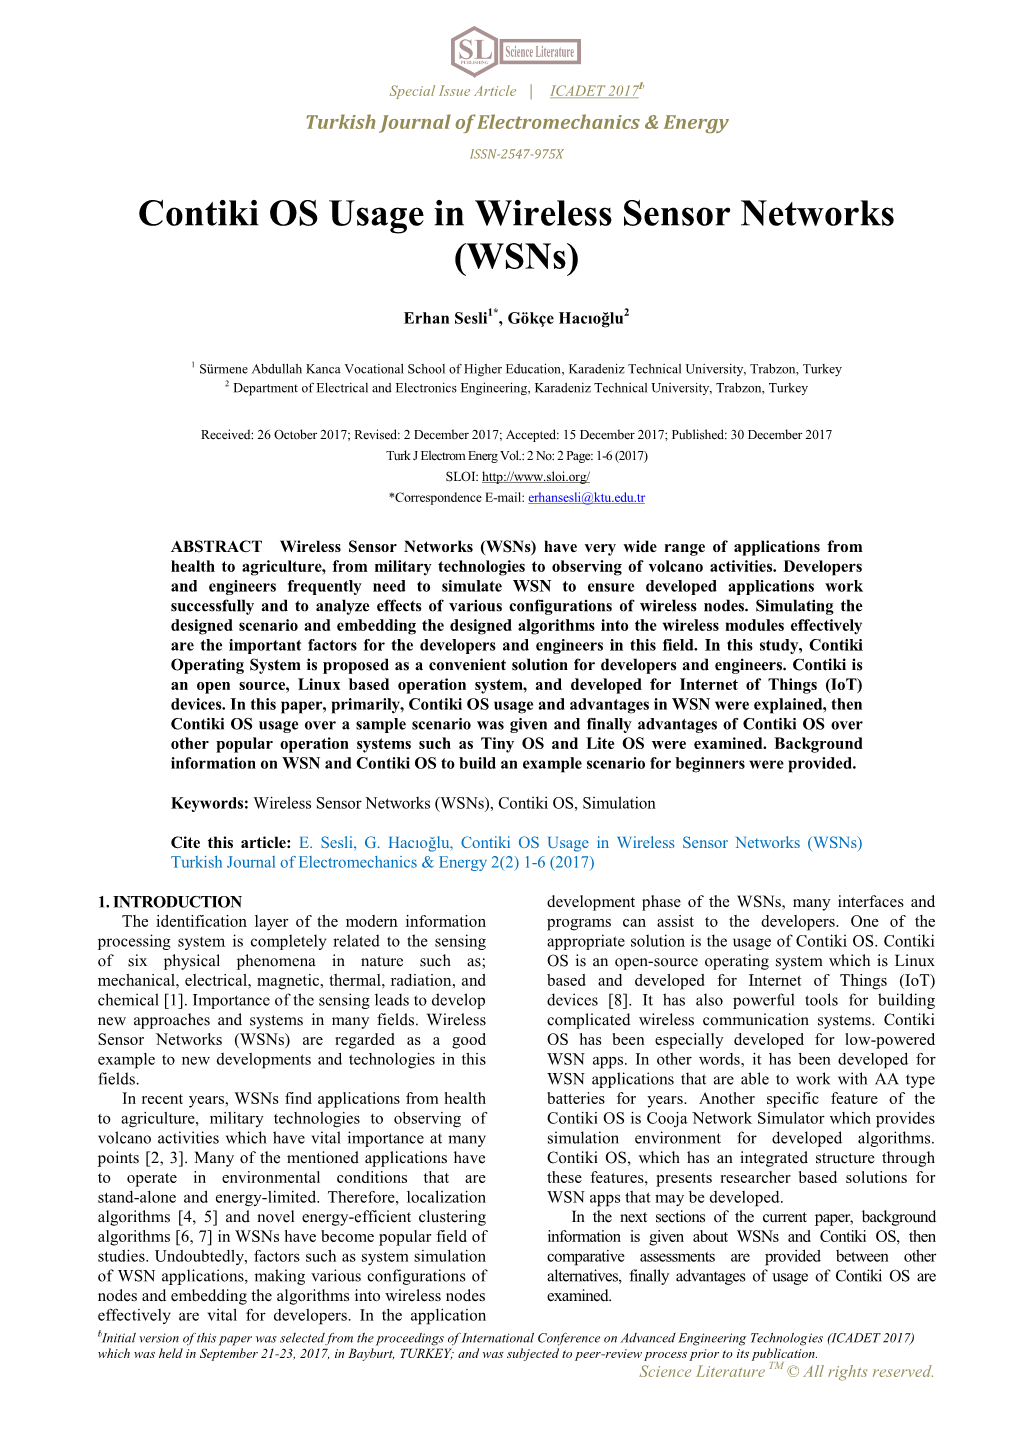 Contiki OS Usage in Wireless Sensor Networks (Wsns)